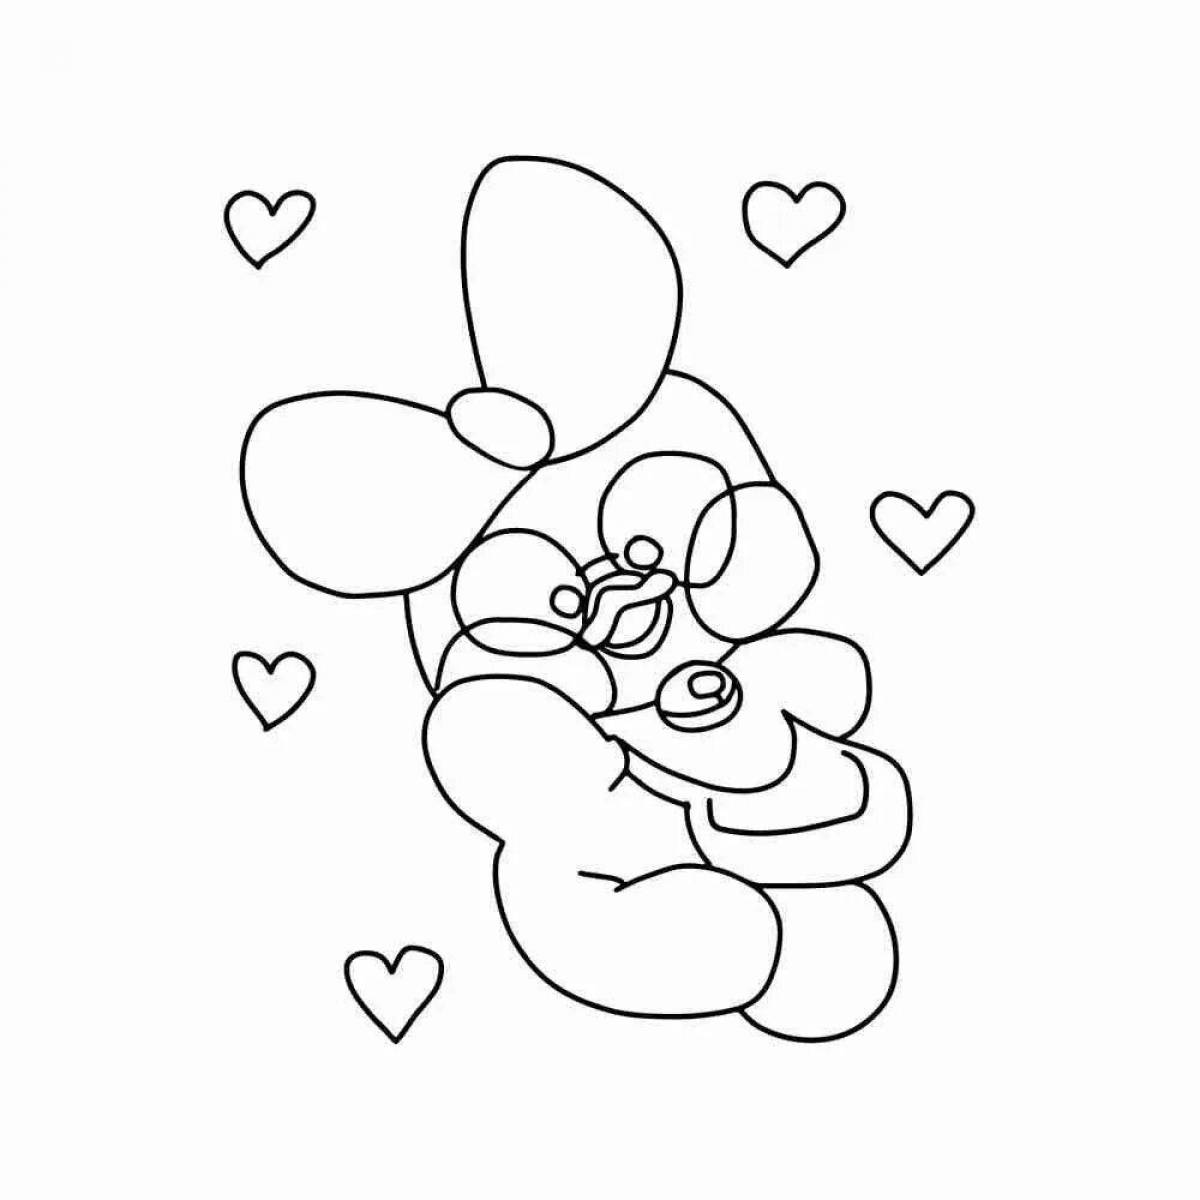 Animated ooty lalafan coloring page